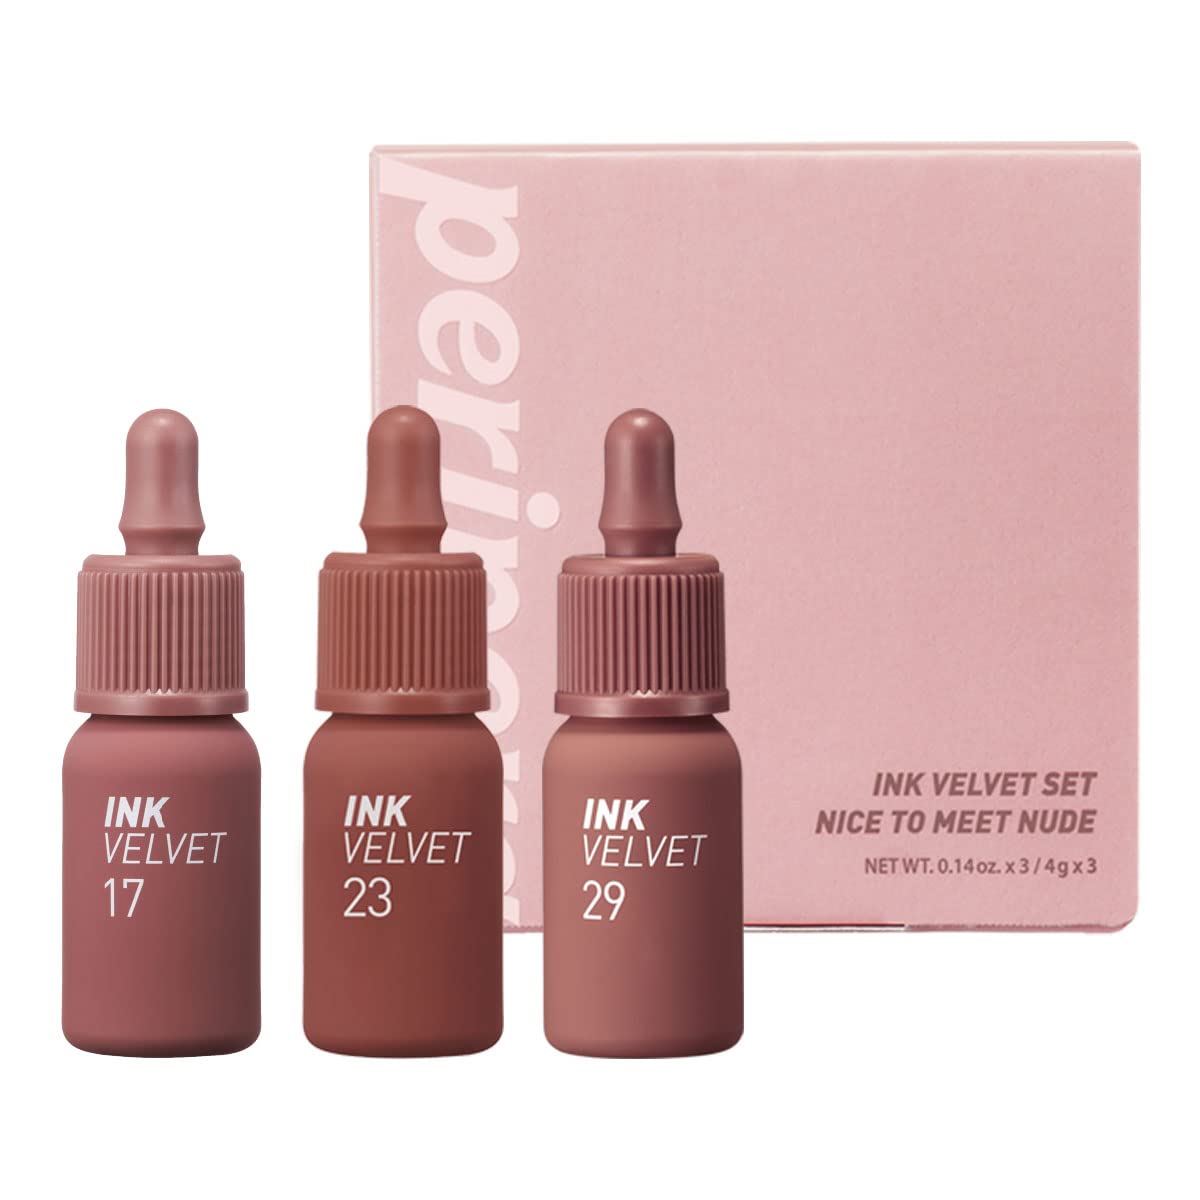 Peripera Ink the Velvet Lip Tint | High Pigment Color, Longwear, Weightless, Not Animal Tested, Gluten-Free, Paraben-Free | NICE TO MEET NUDE, 0.14 fl oz*3